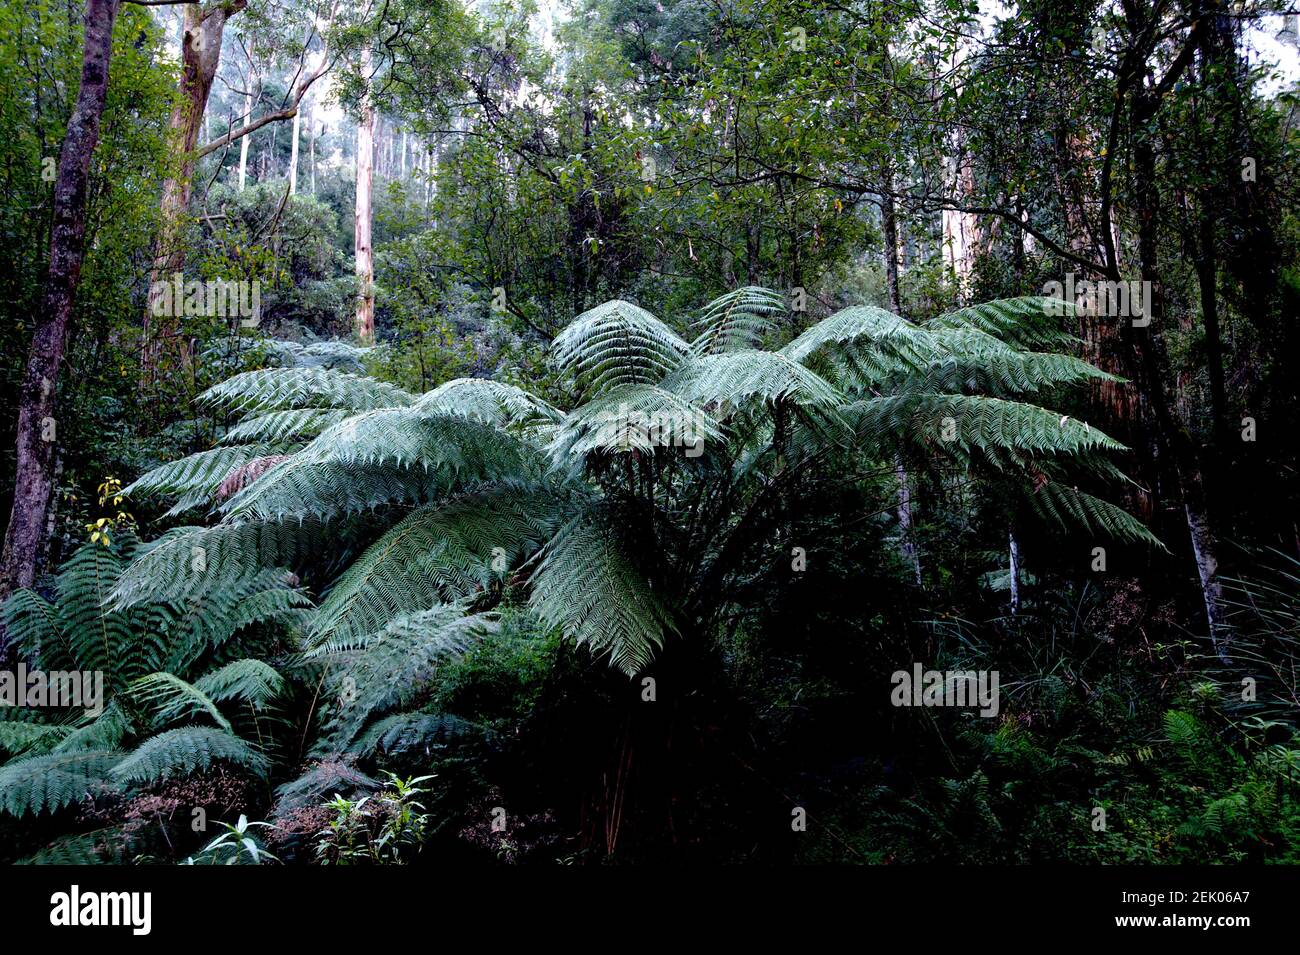 The Tree Ferns grow big around here! This Dicksonia Antarctica is flourishing in Dandenong Ranges National Park, near Ferntree Gully in Victoria, Aus. Stock Photo